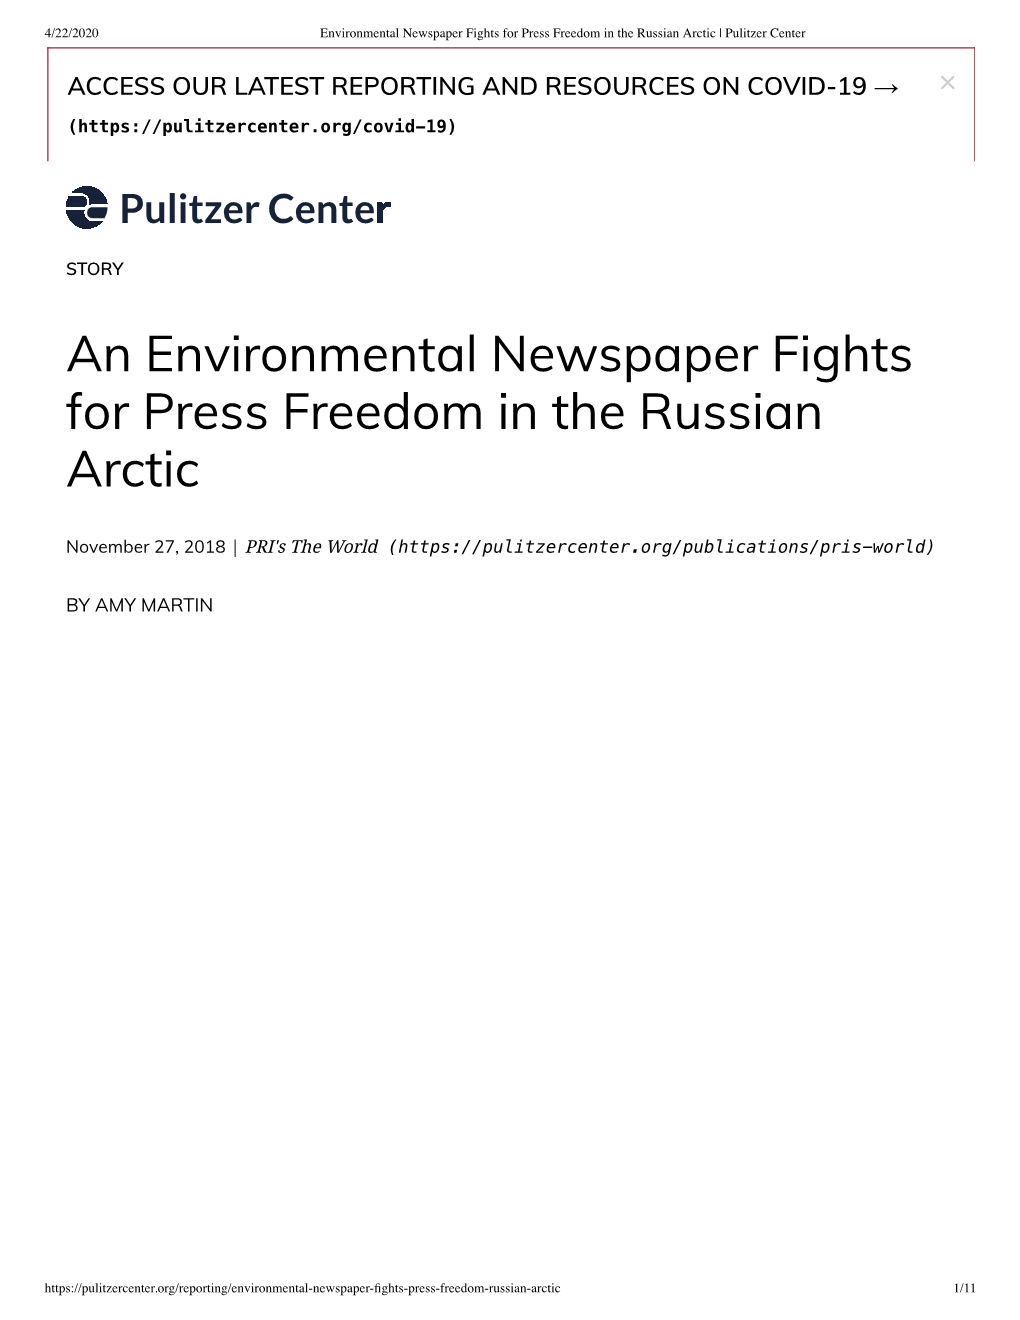 An Environmental Newspaper Fights for Press Freedom in the Russian Arctic